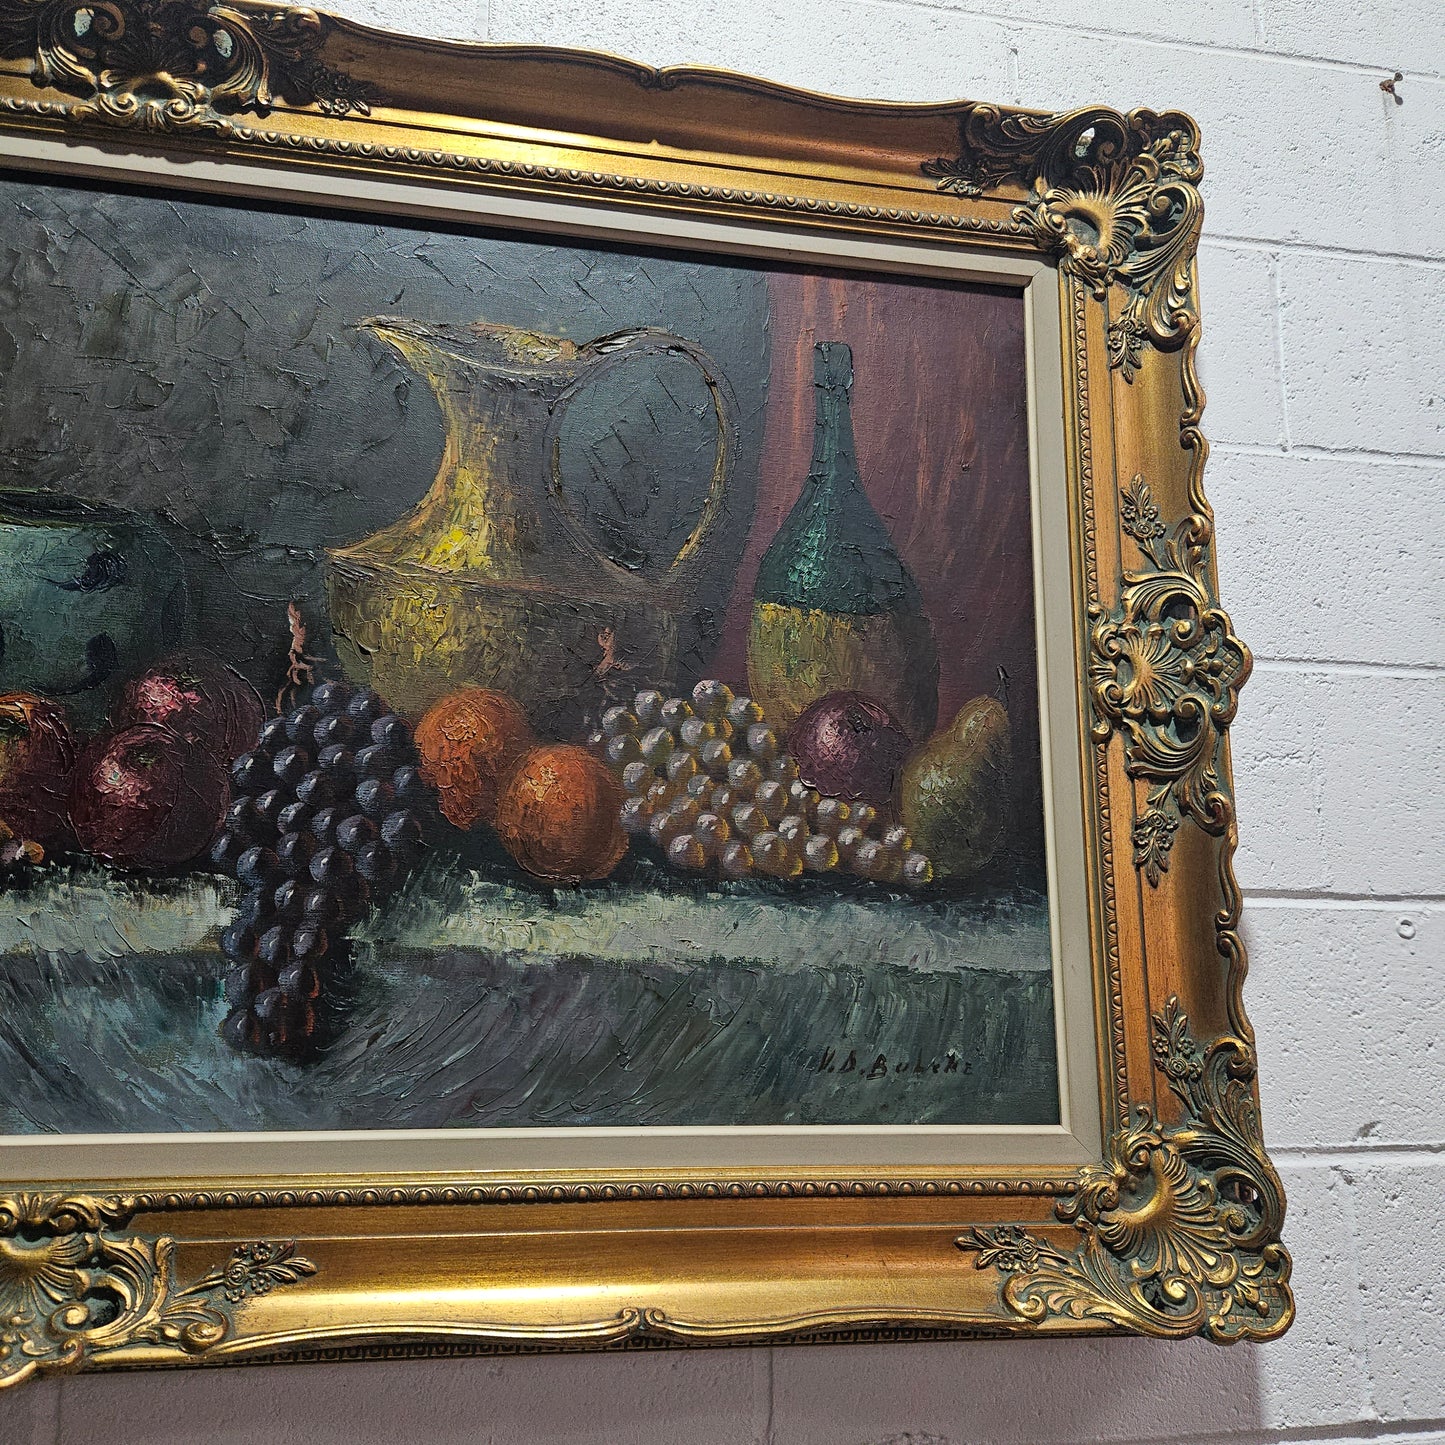 Sourced from France a beautiful oil on canvas still life in a decorative gilt frame. It is in good original condition.